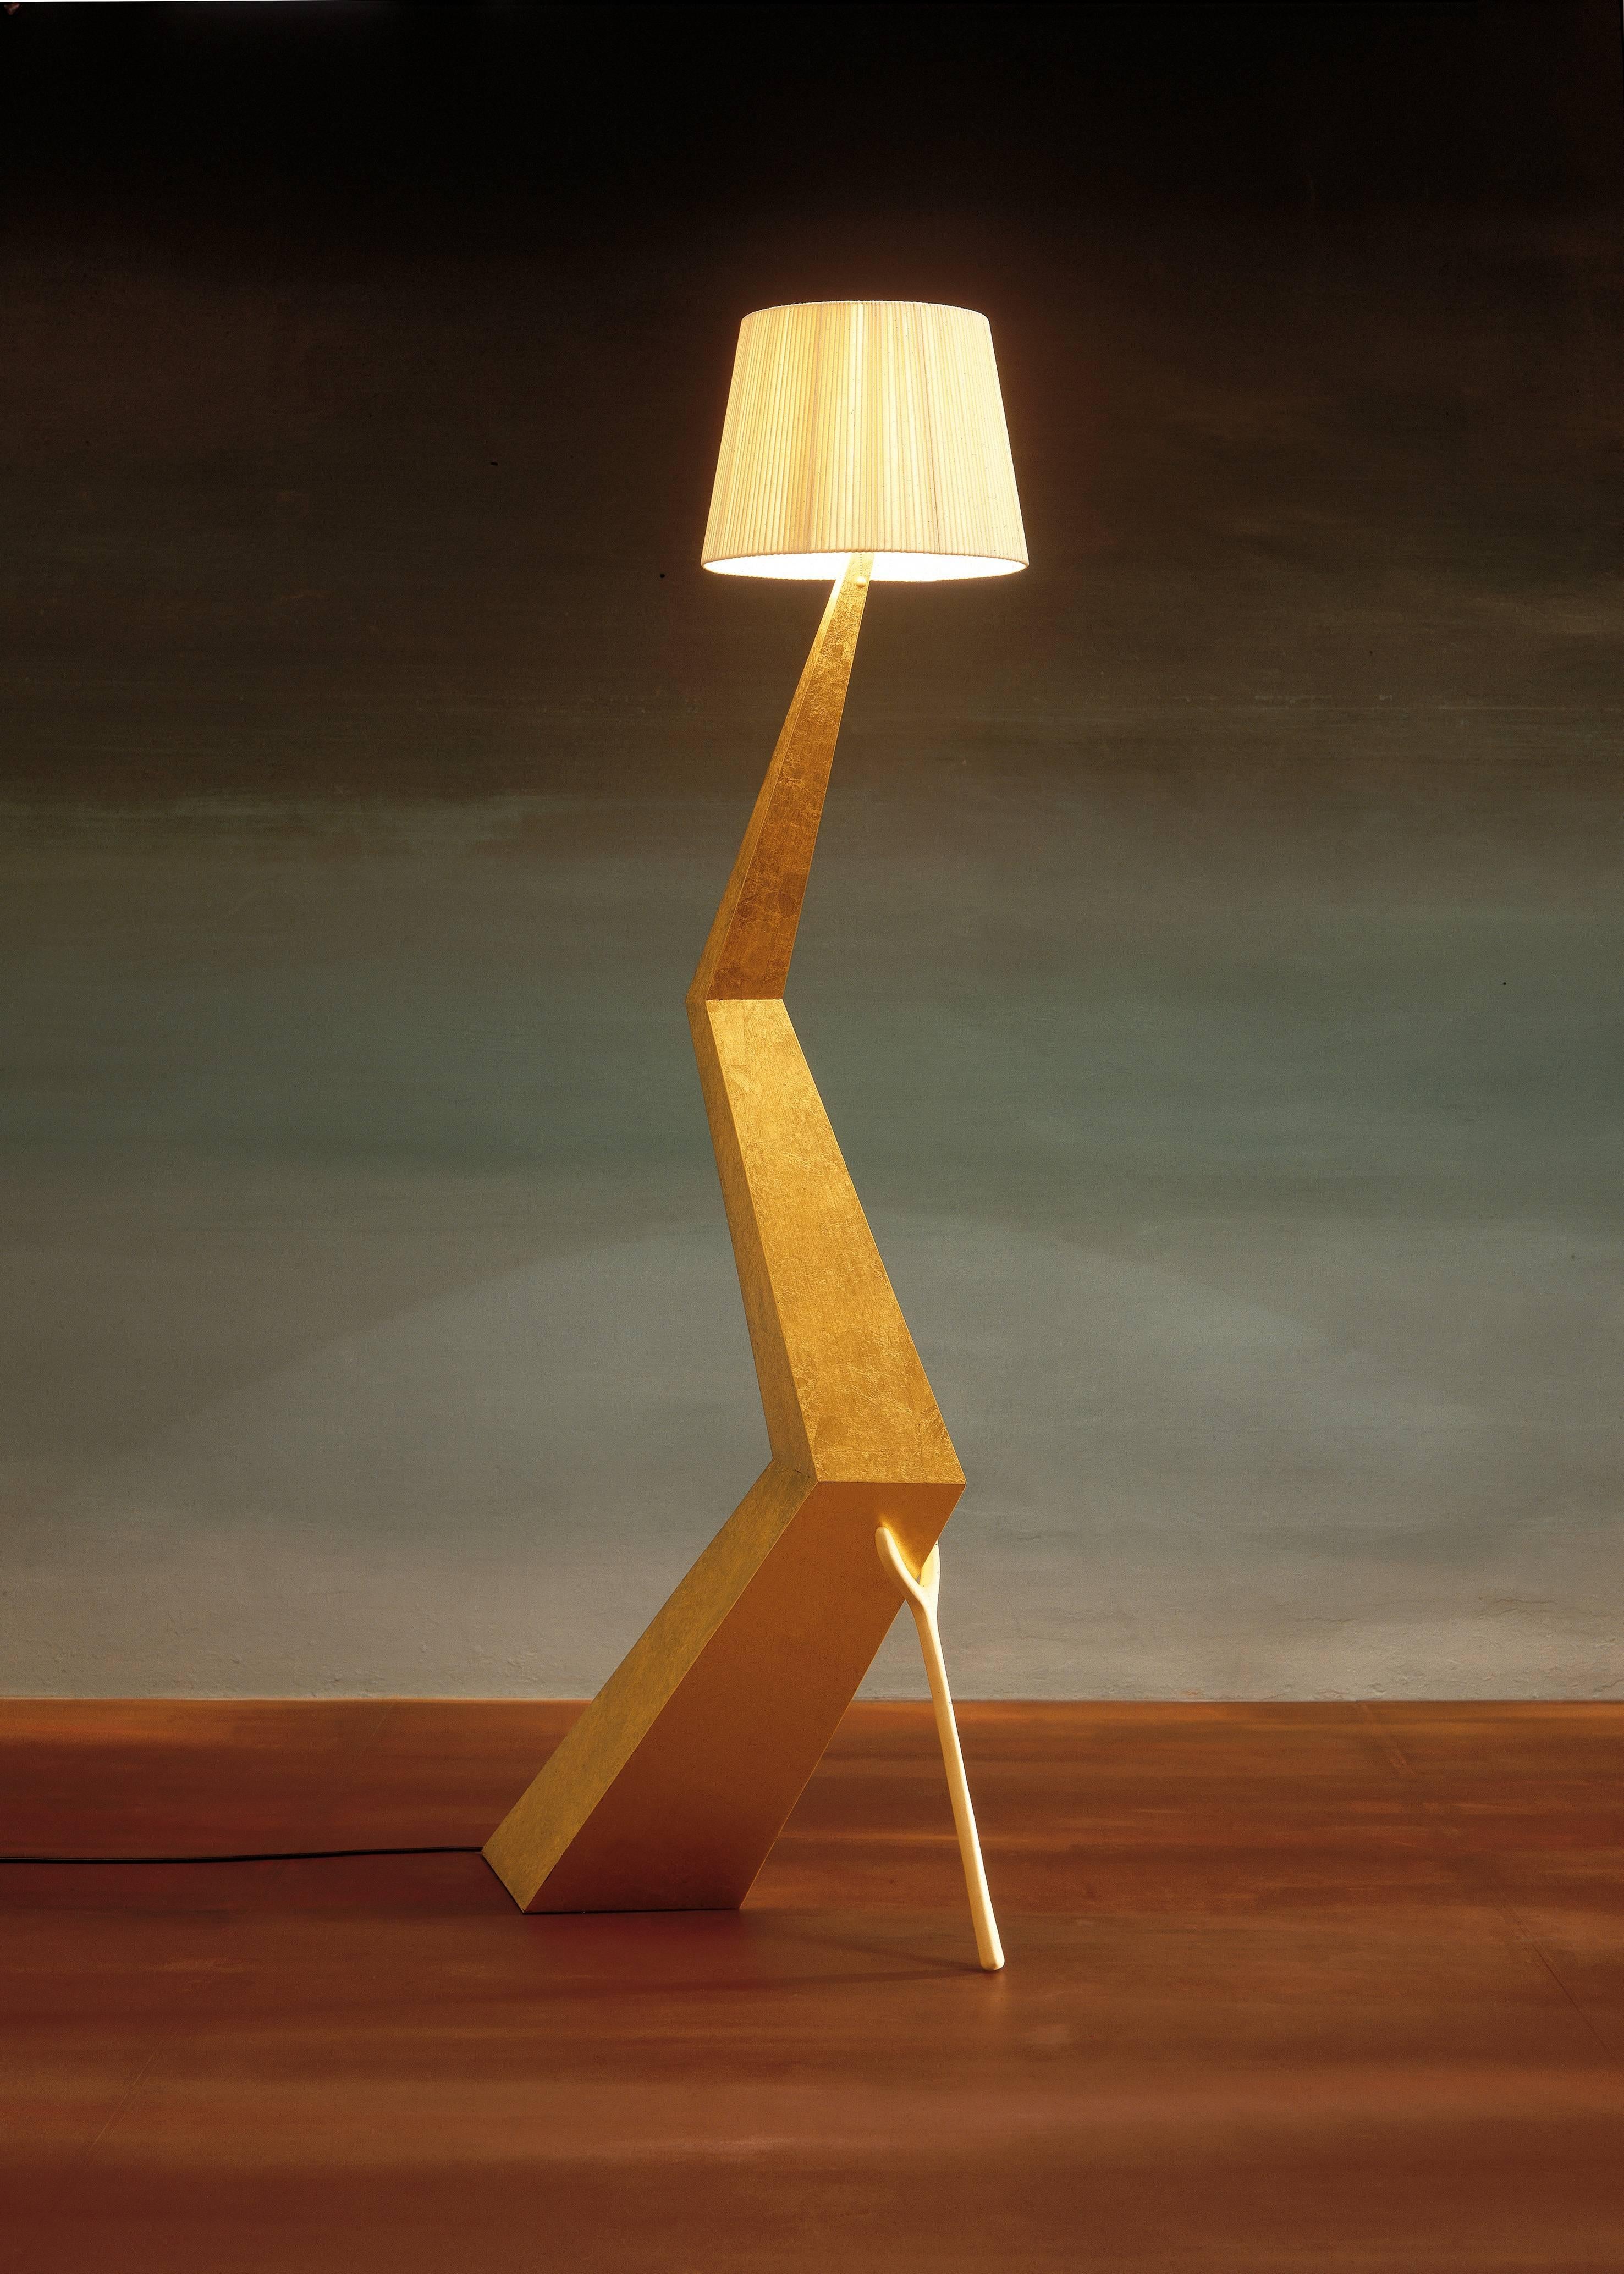 Braceli Lamp designed by Salvador Dali manufactured by BD furniture in Barcelona.

Bracelli
panel structure covered with silver plated polyester painting (Fine gold leaf).
lampshade in ivory cotton and rayon. 

Measures: 37x64x180 H. cm